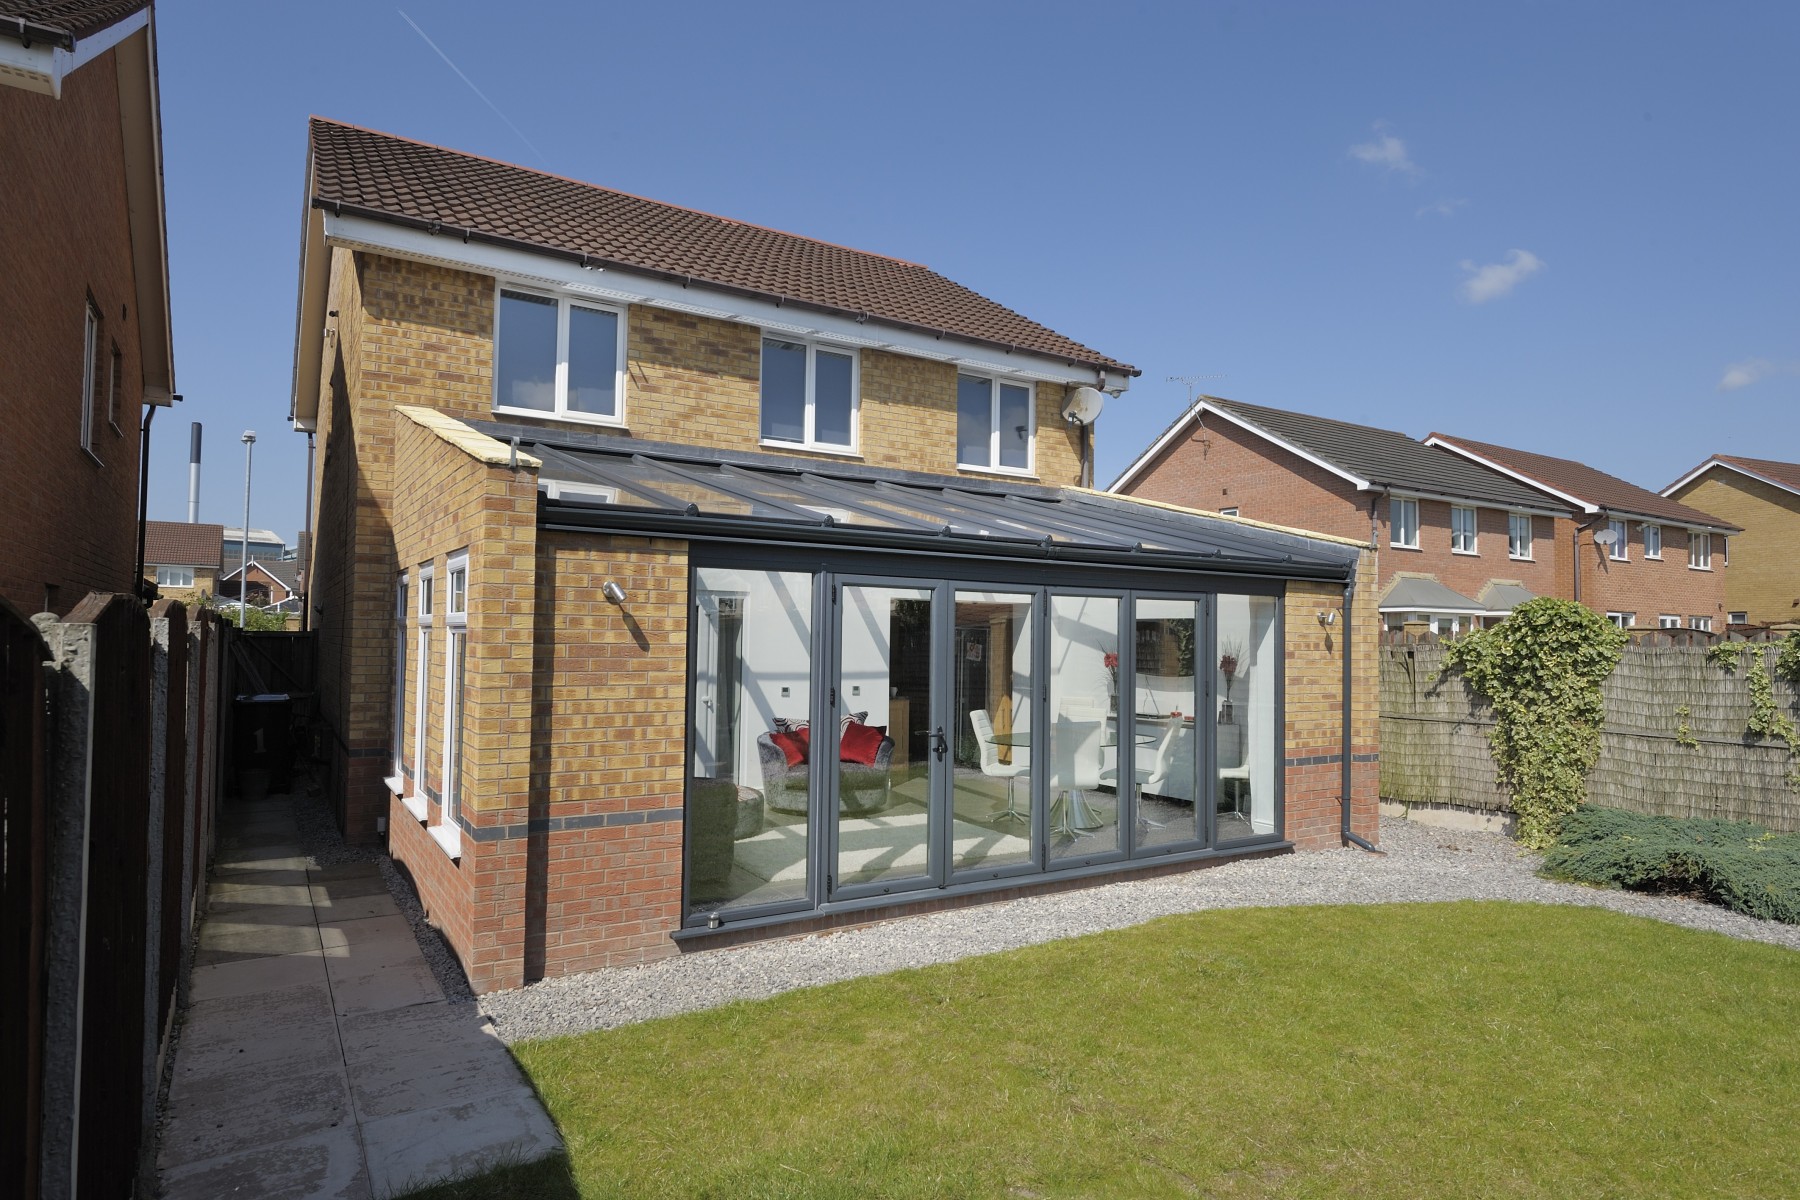 Why Replace a Conservatory Roof?